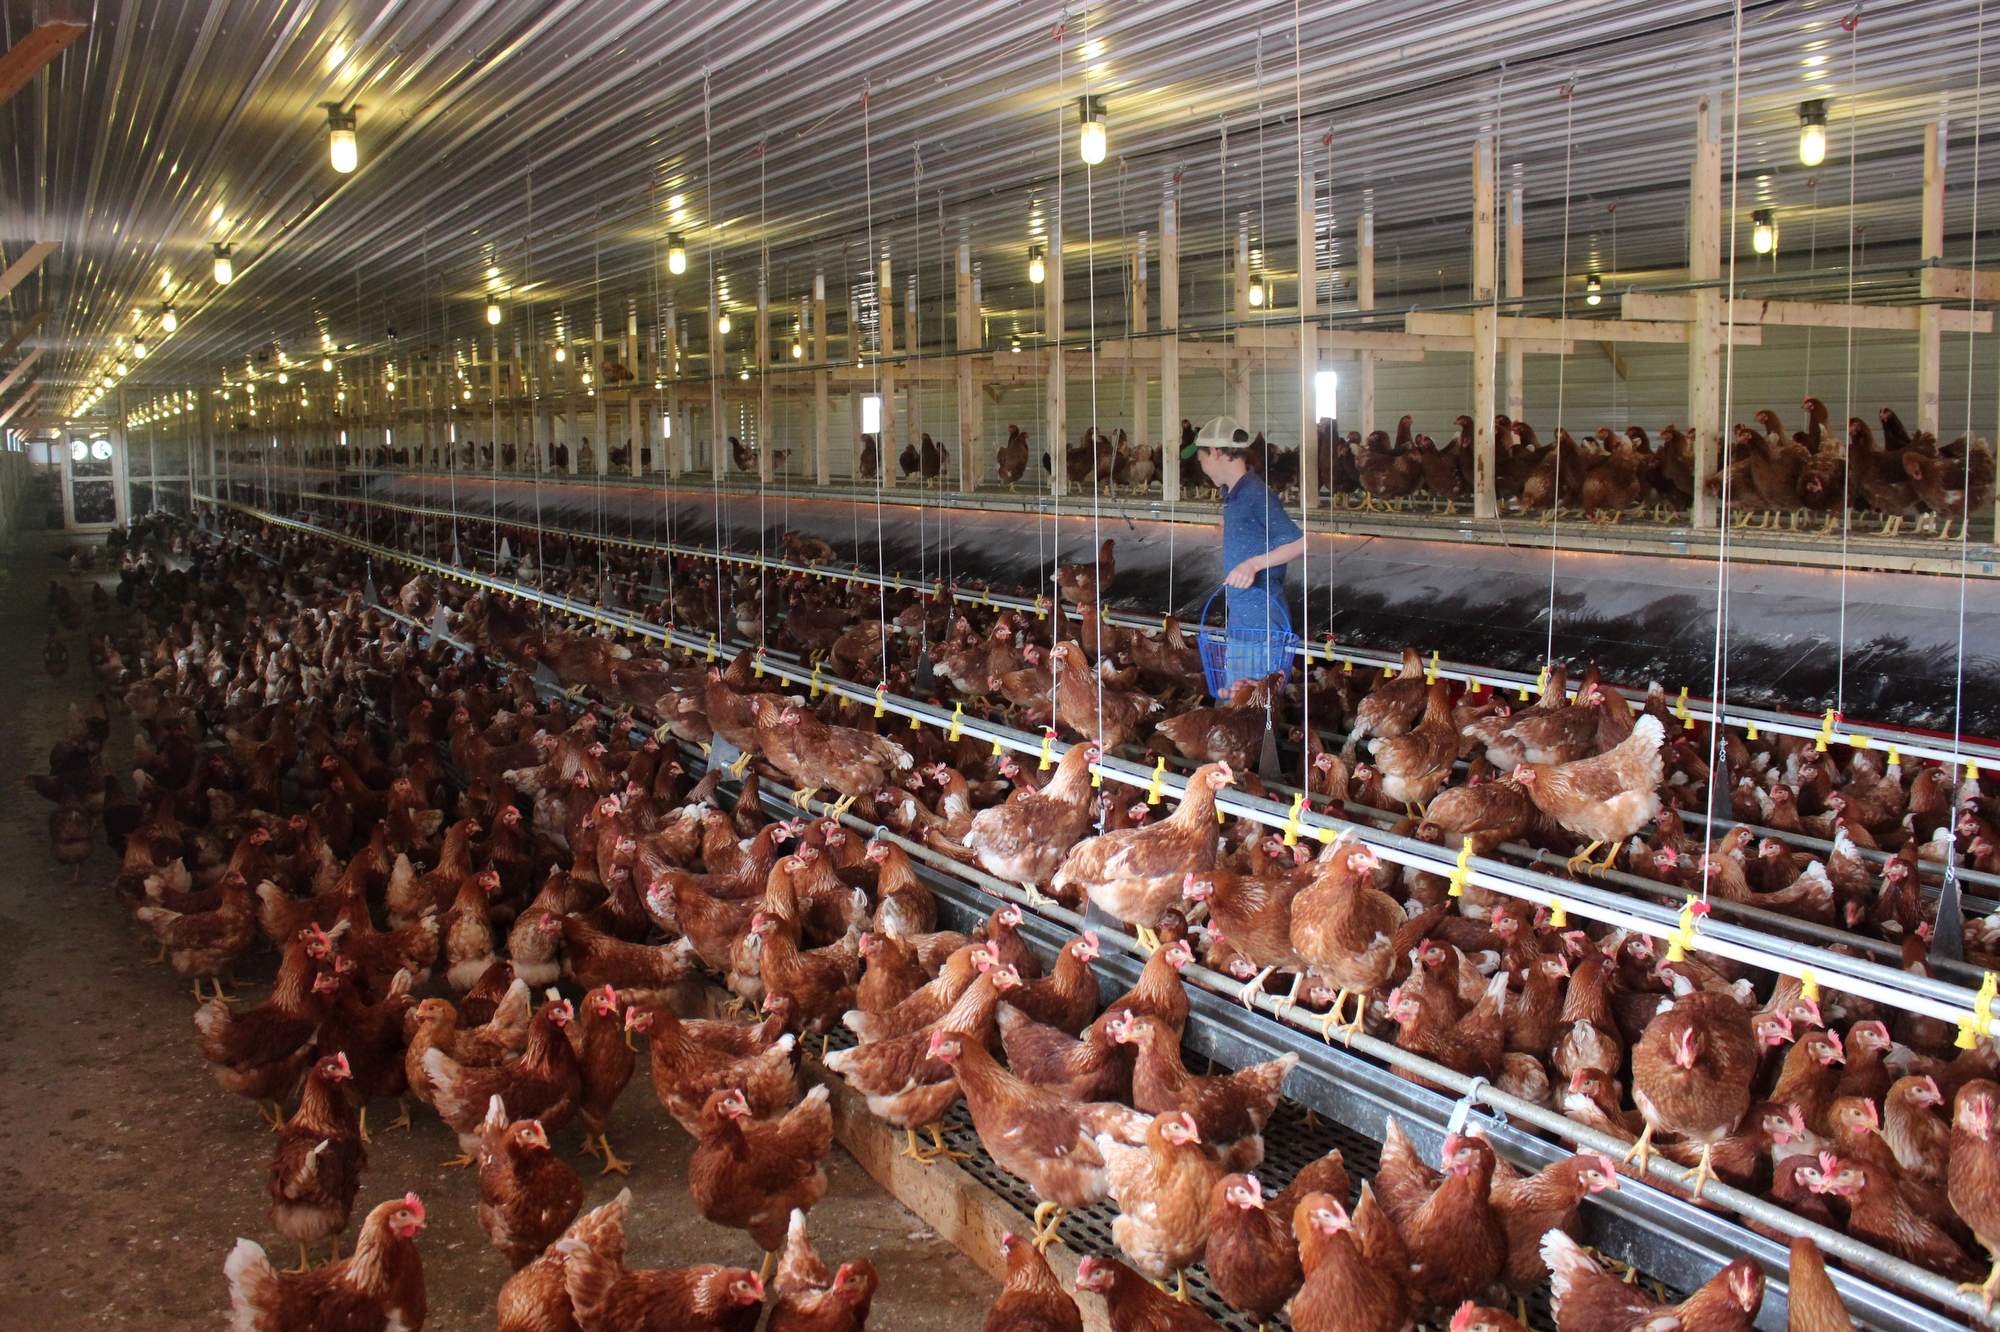 Cage-free chickens in a barn near Hershey, Pa., get to roam and perch on steel rods (but they don't go outside). In September, McDonald's said it would buy only cage-free eggs, inspiring several other food companies to follow suit. Dan Charles/NPR